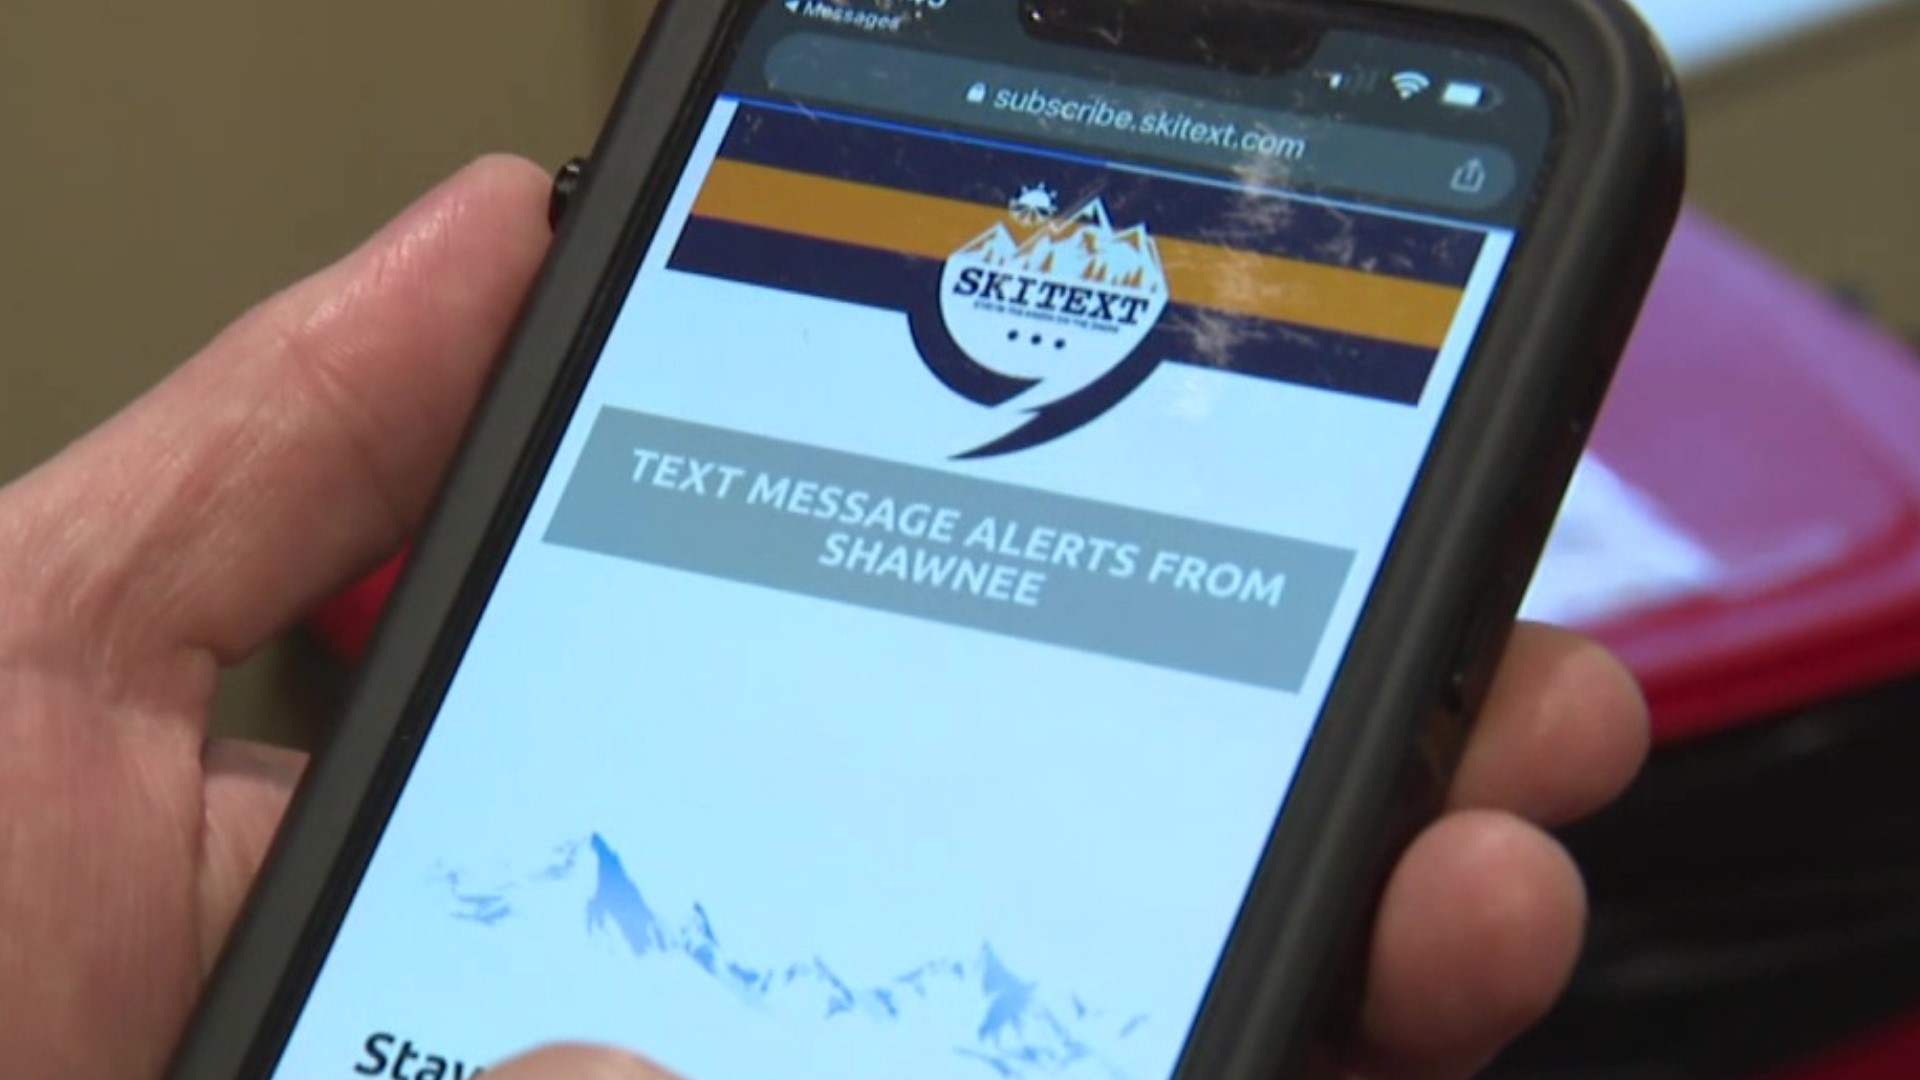 It's a texting platform where users can ask questions and get information about select ski resorts.